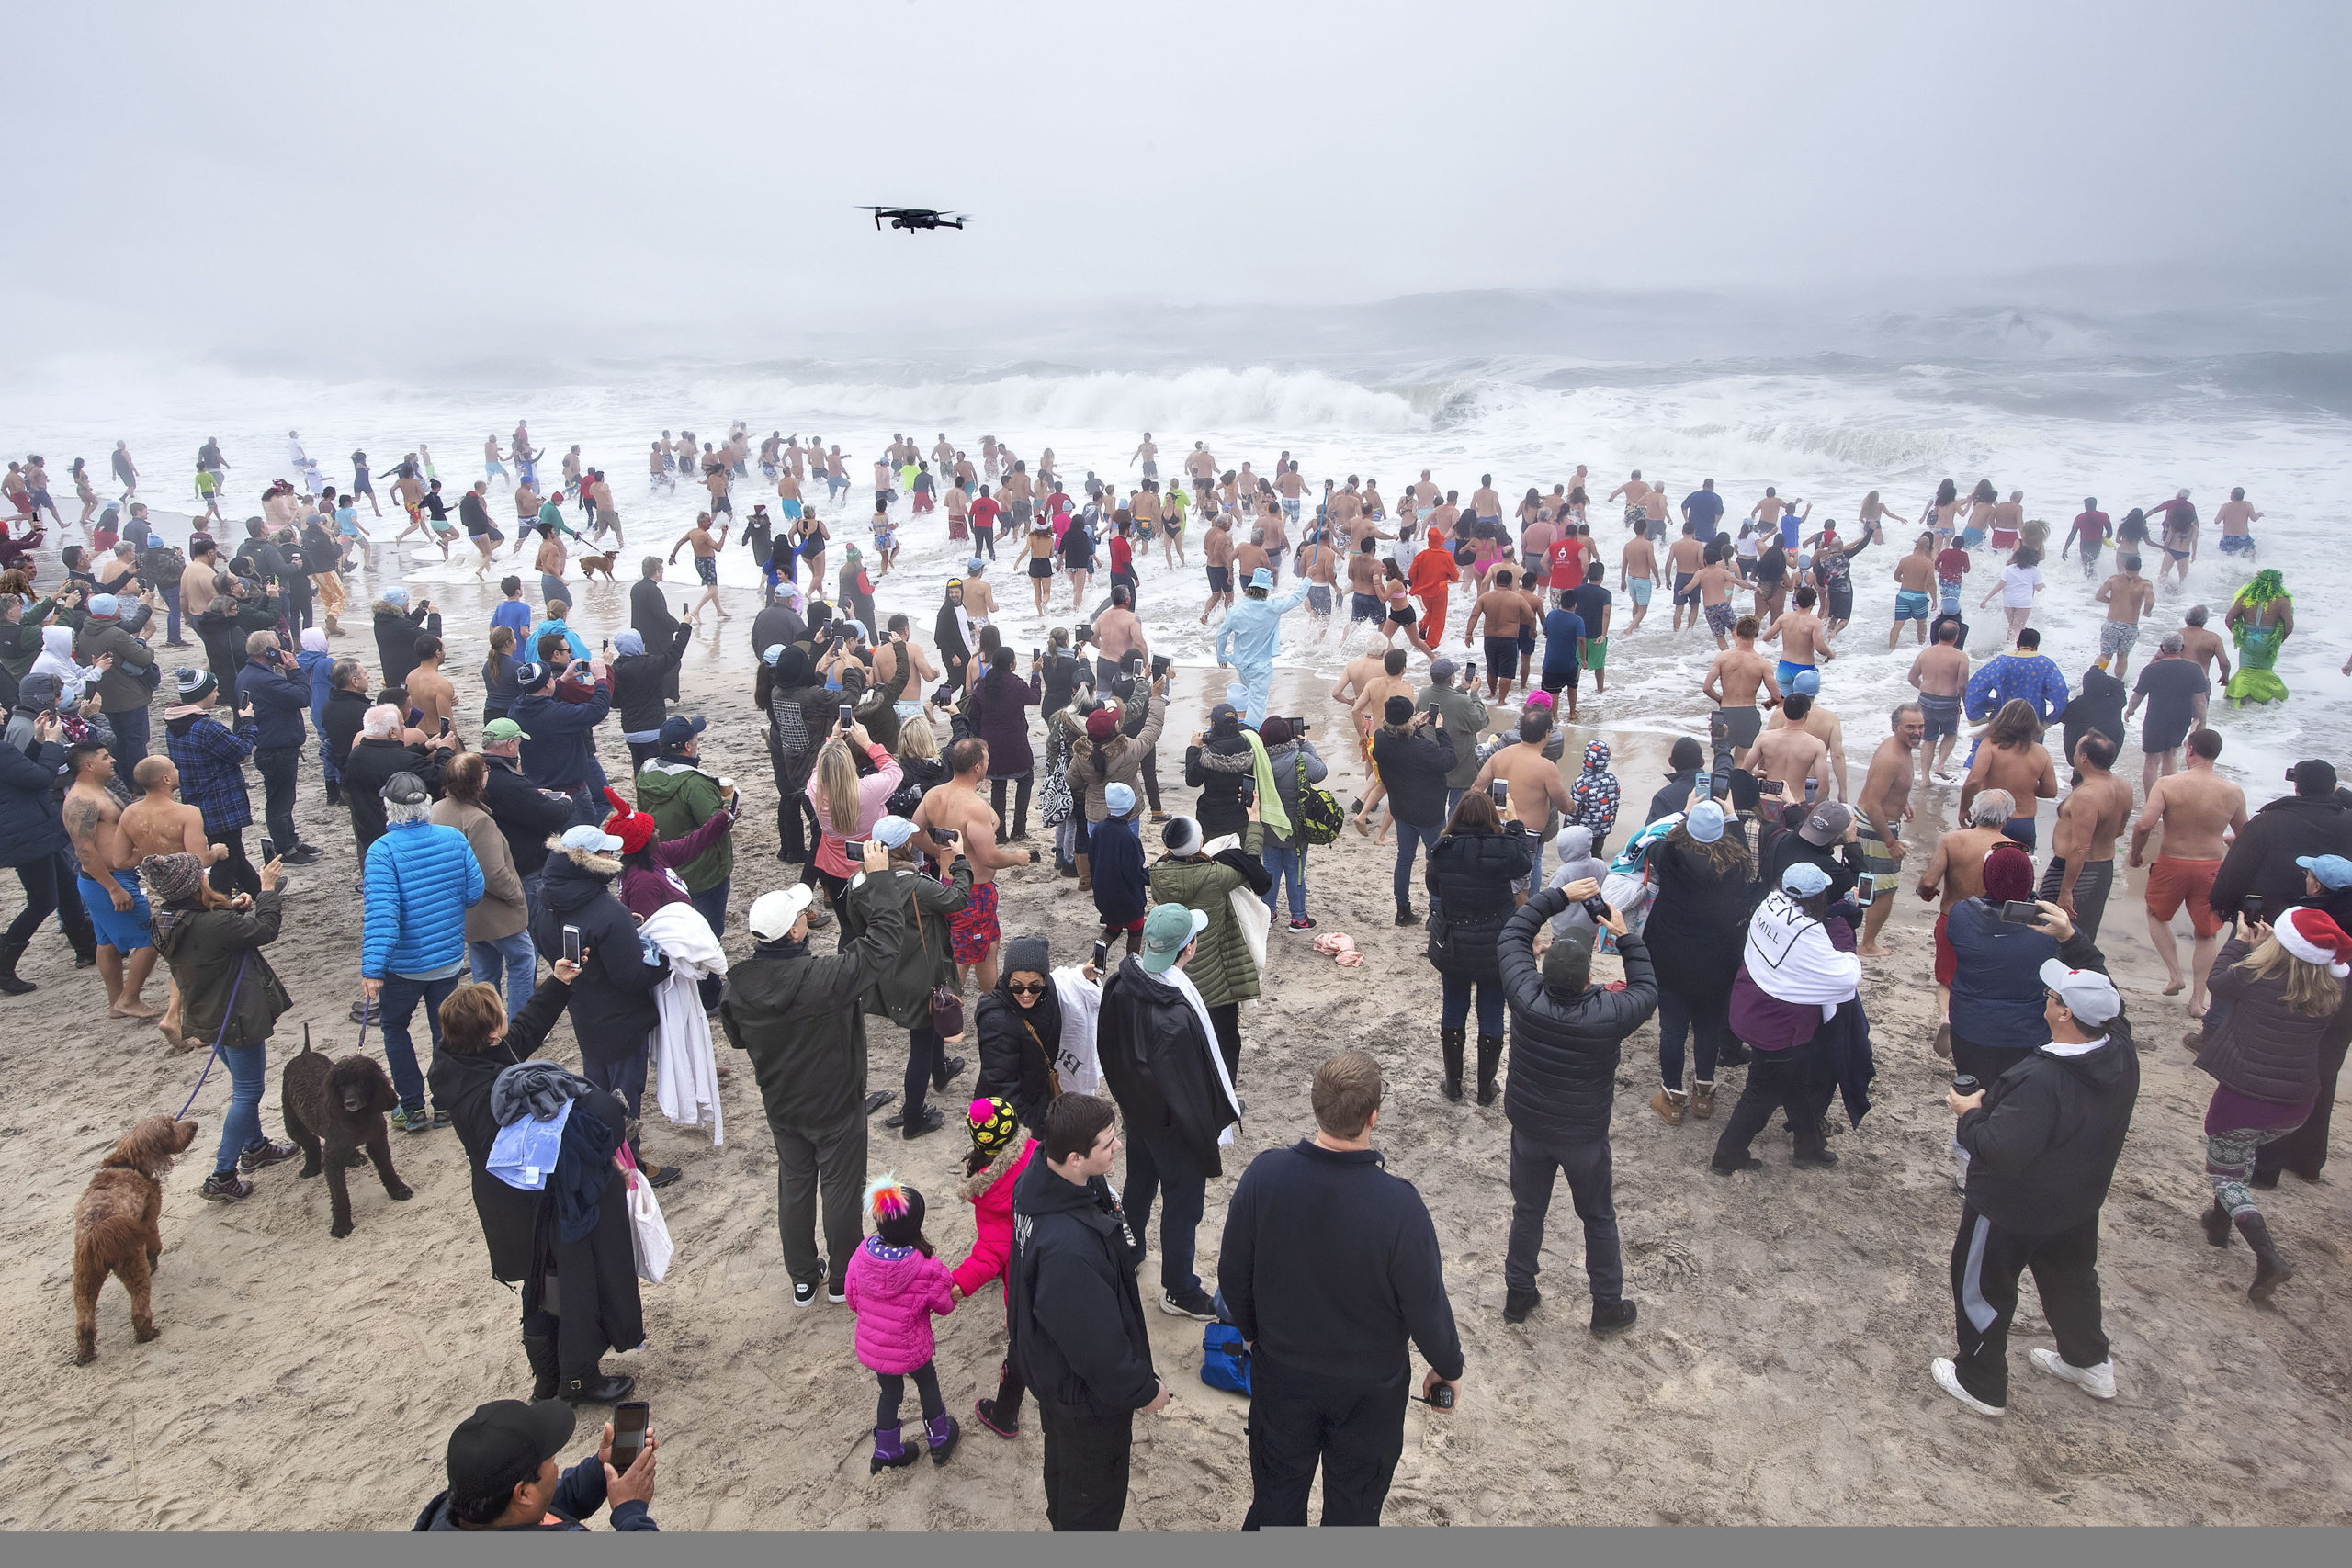 Hundreds of brave swimmers take to the water during the 2019 Heart of the Hamptons Polar Bear Plunge at Coopers Beach in Southampton on Saturday morning.